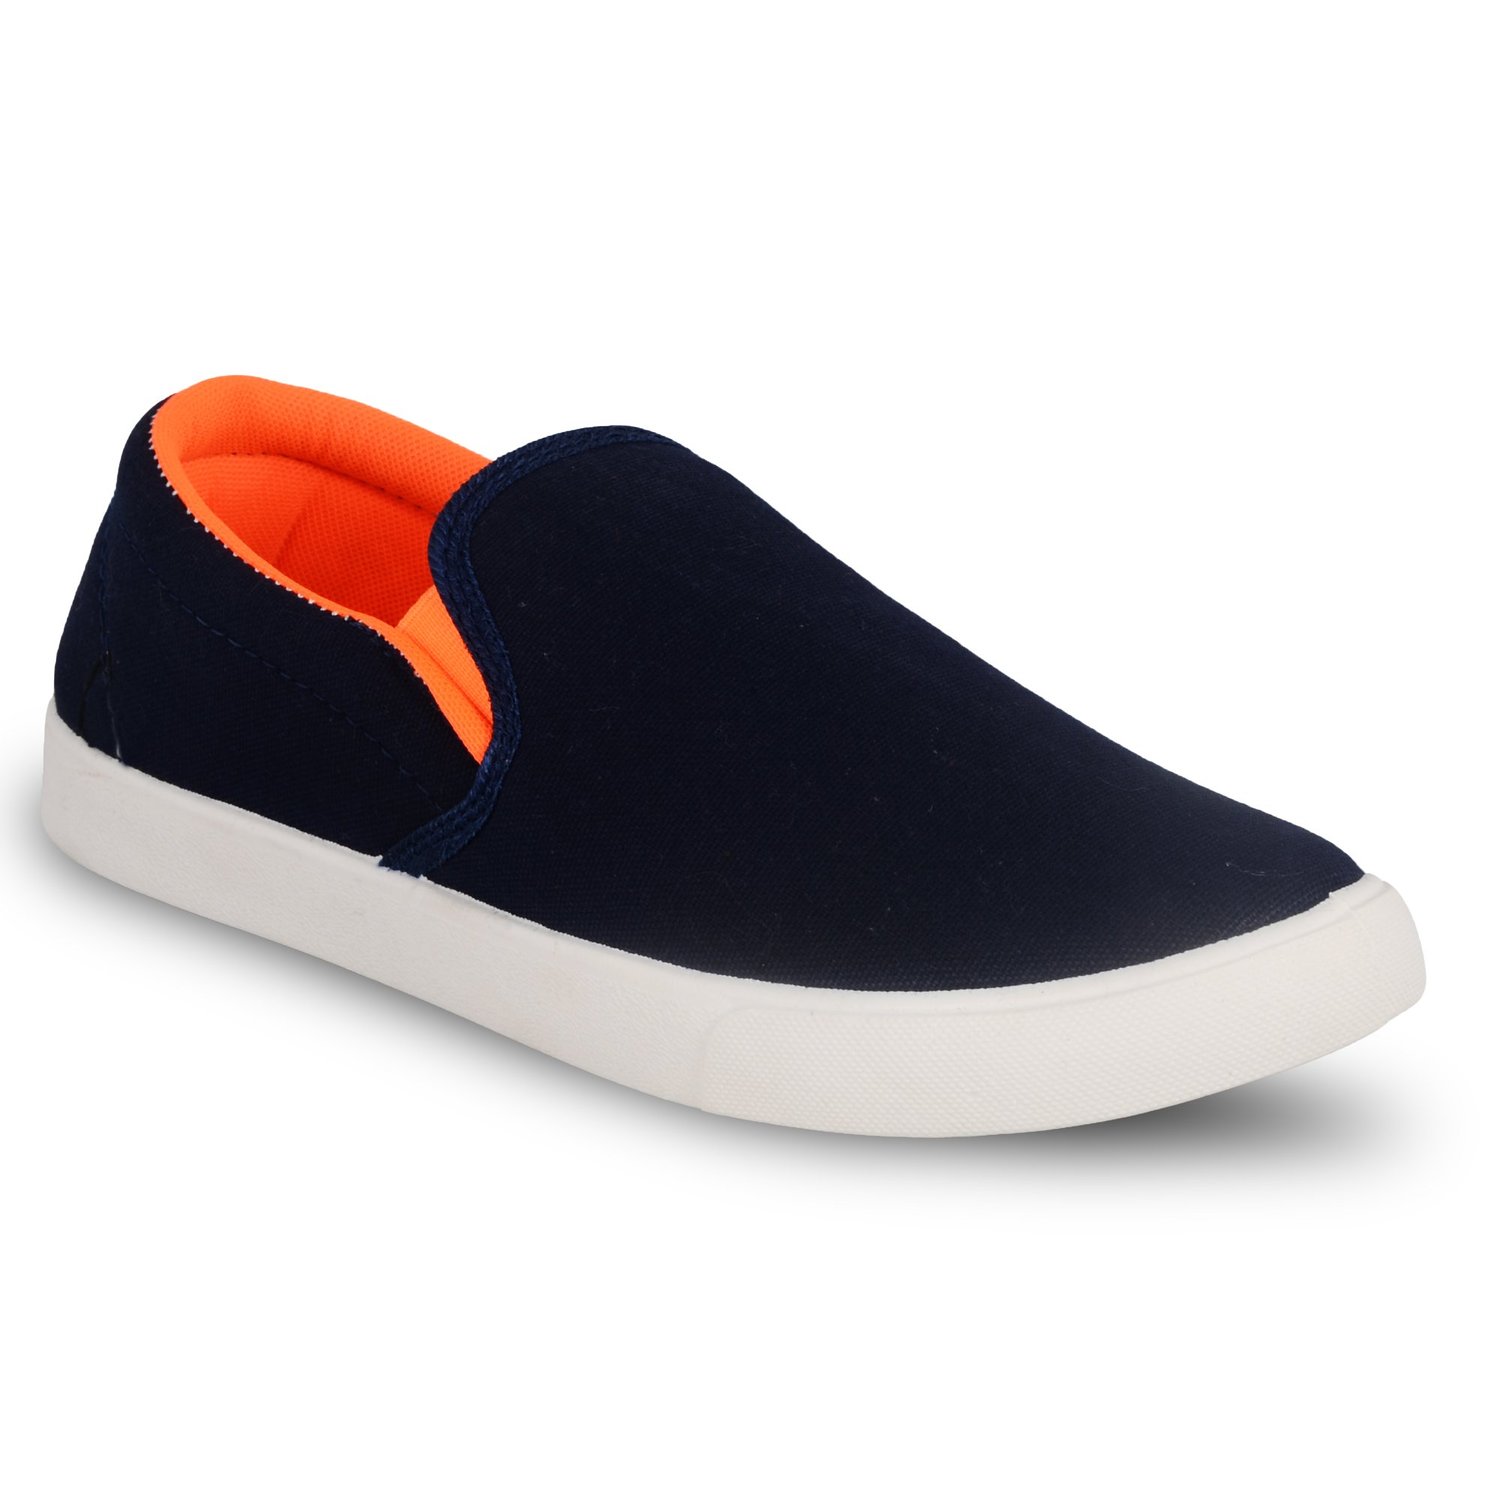 Buy Mens Blue Orange Casual Shoes Online @ ₹399 from ShopClues